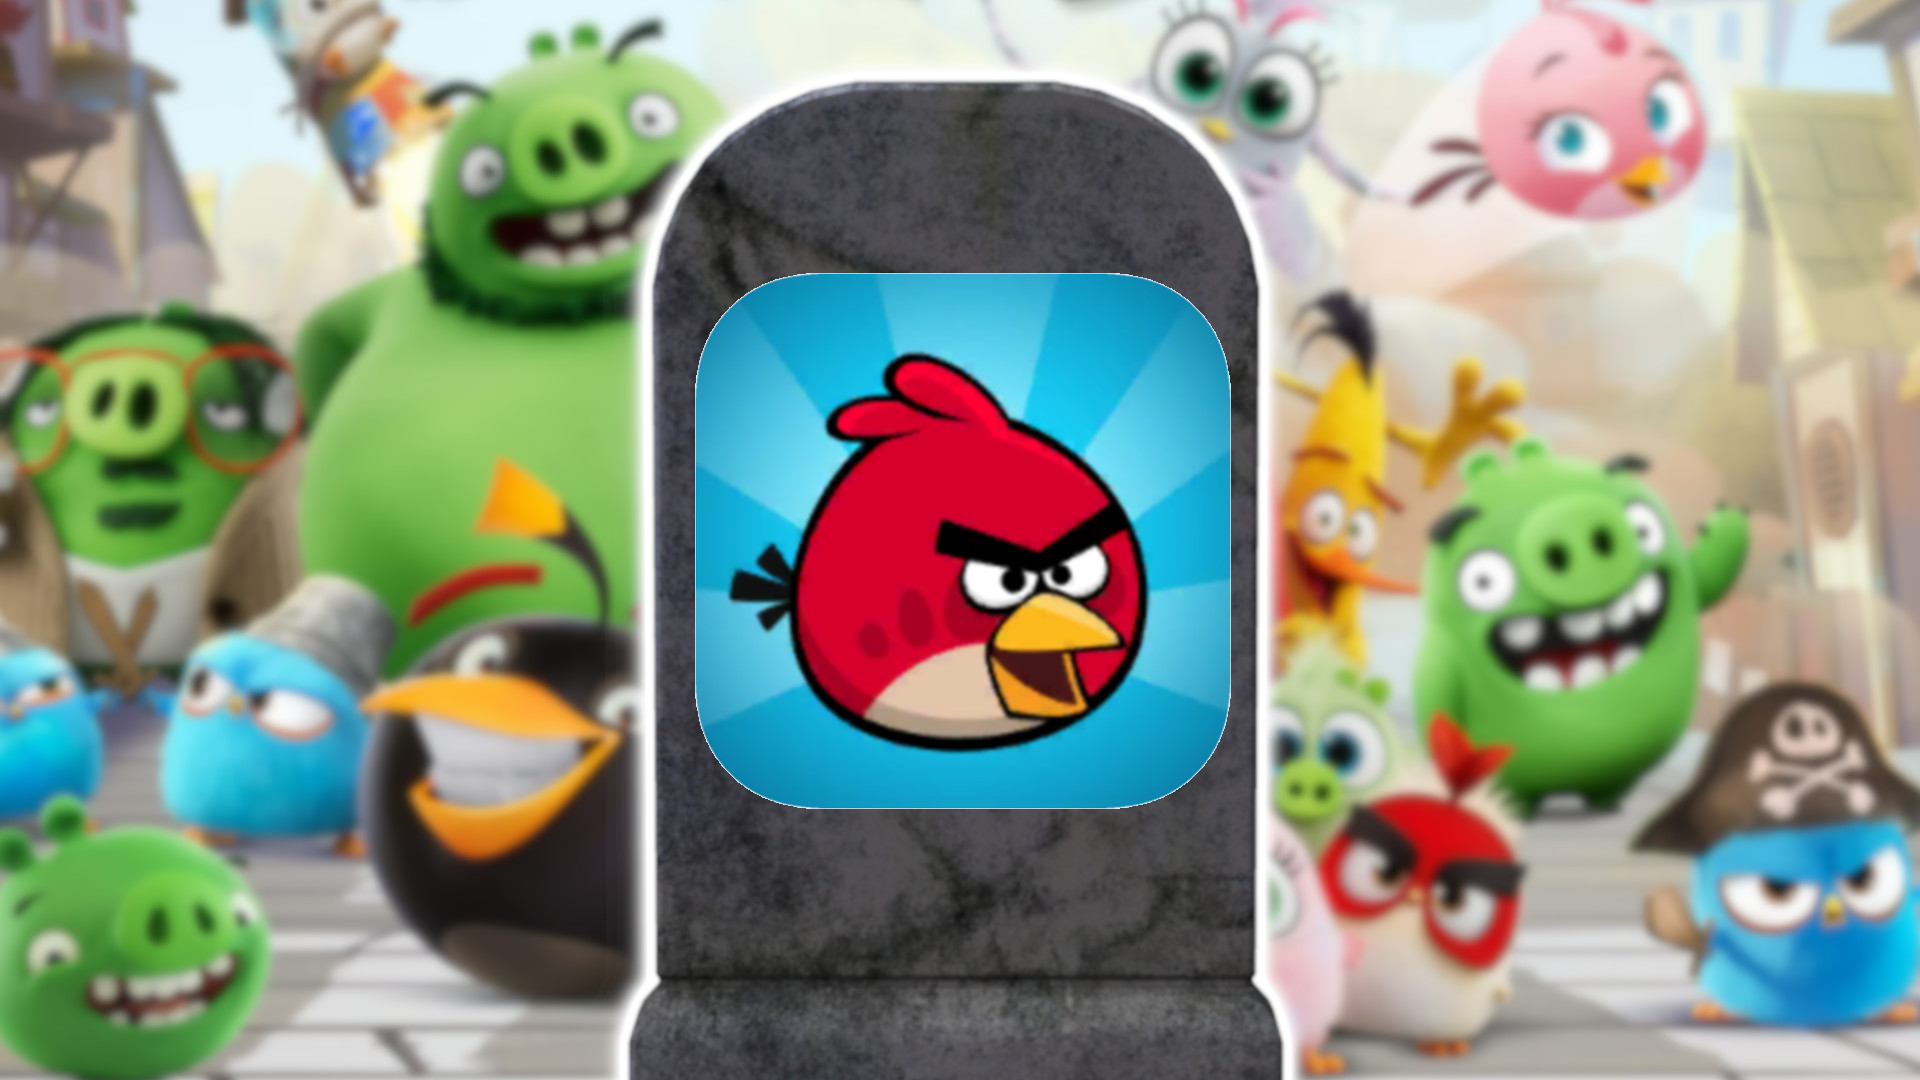 angry birds background without birds